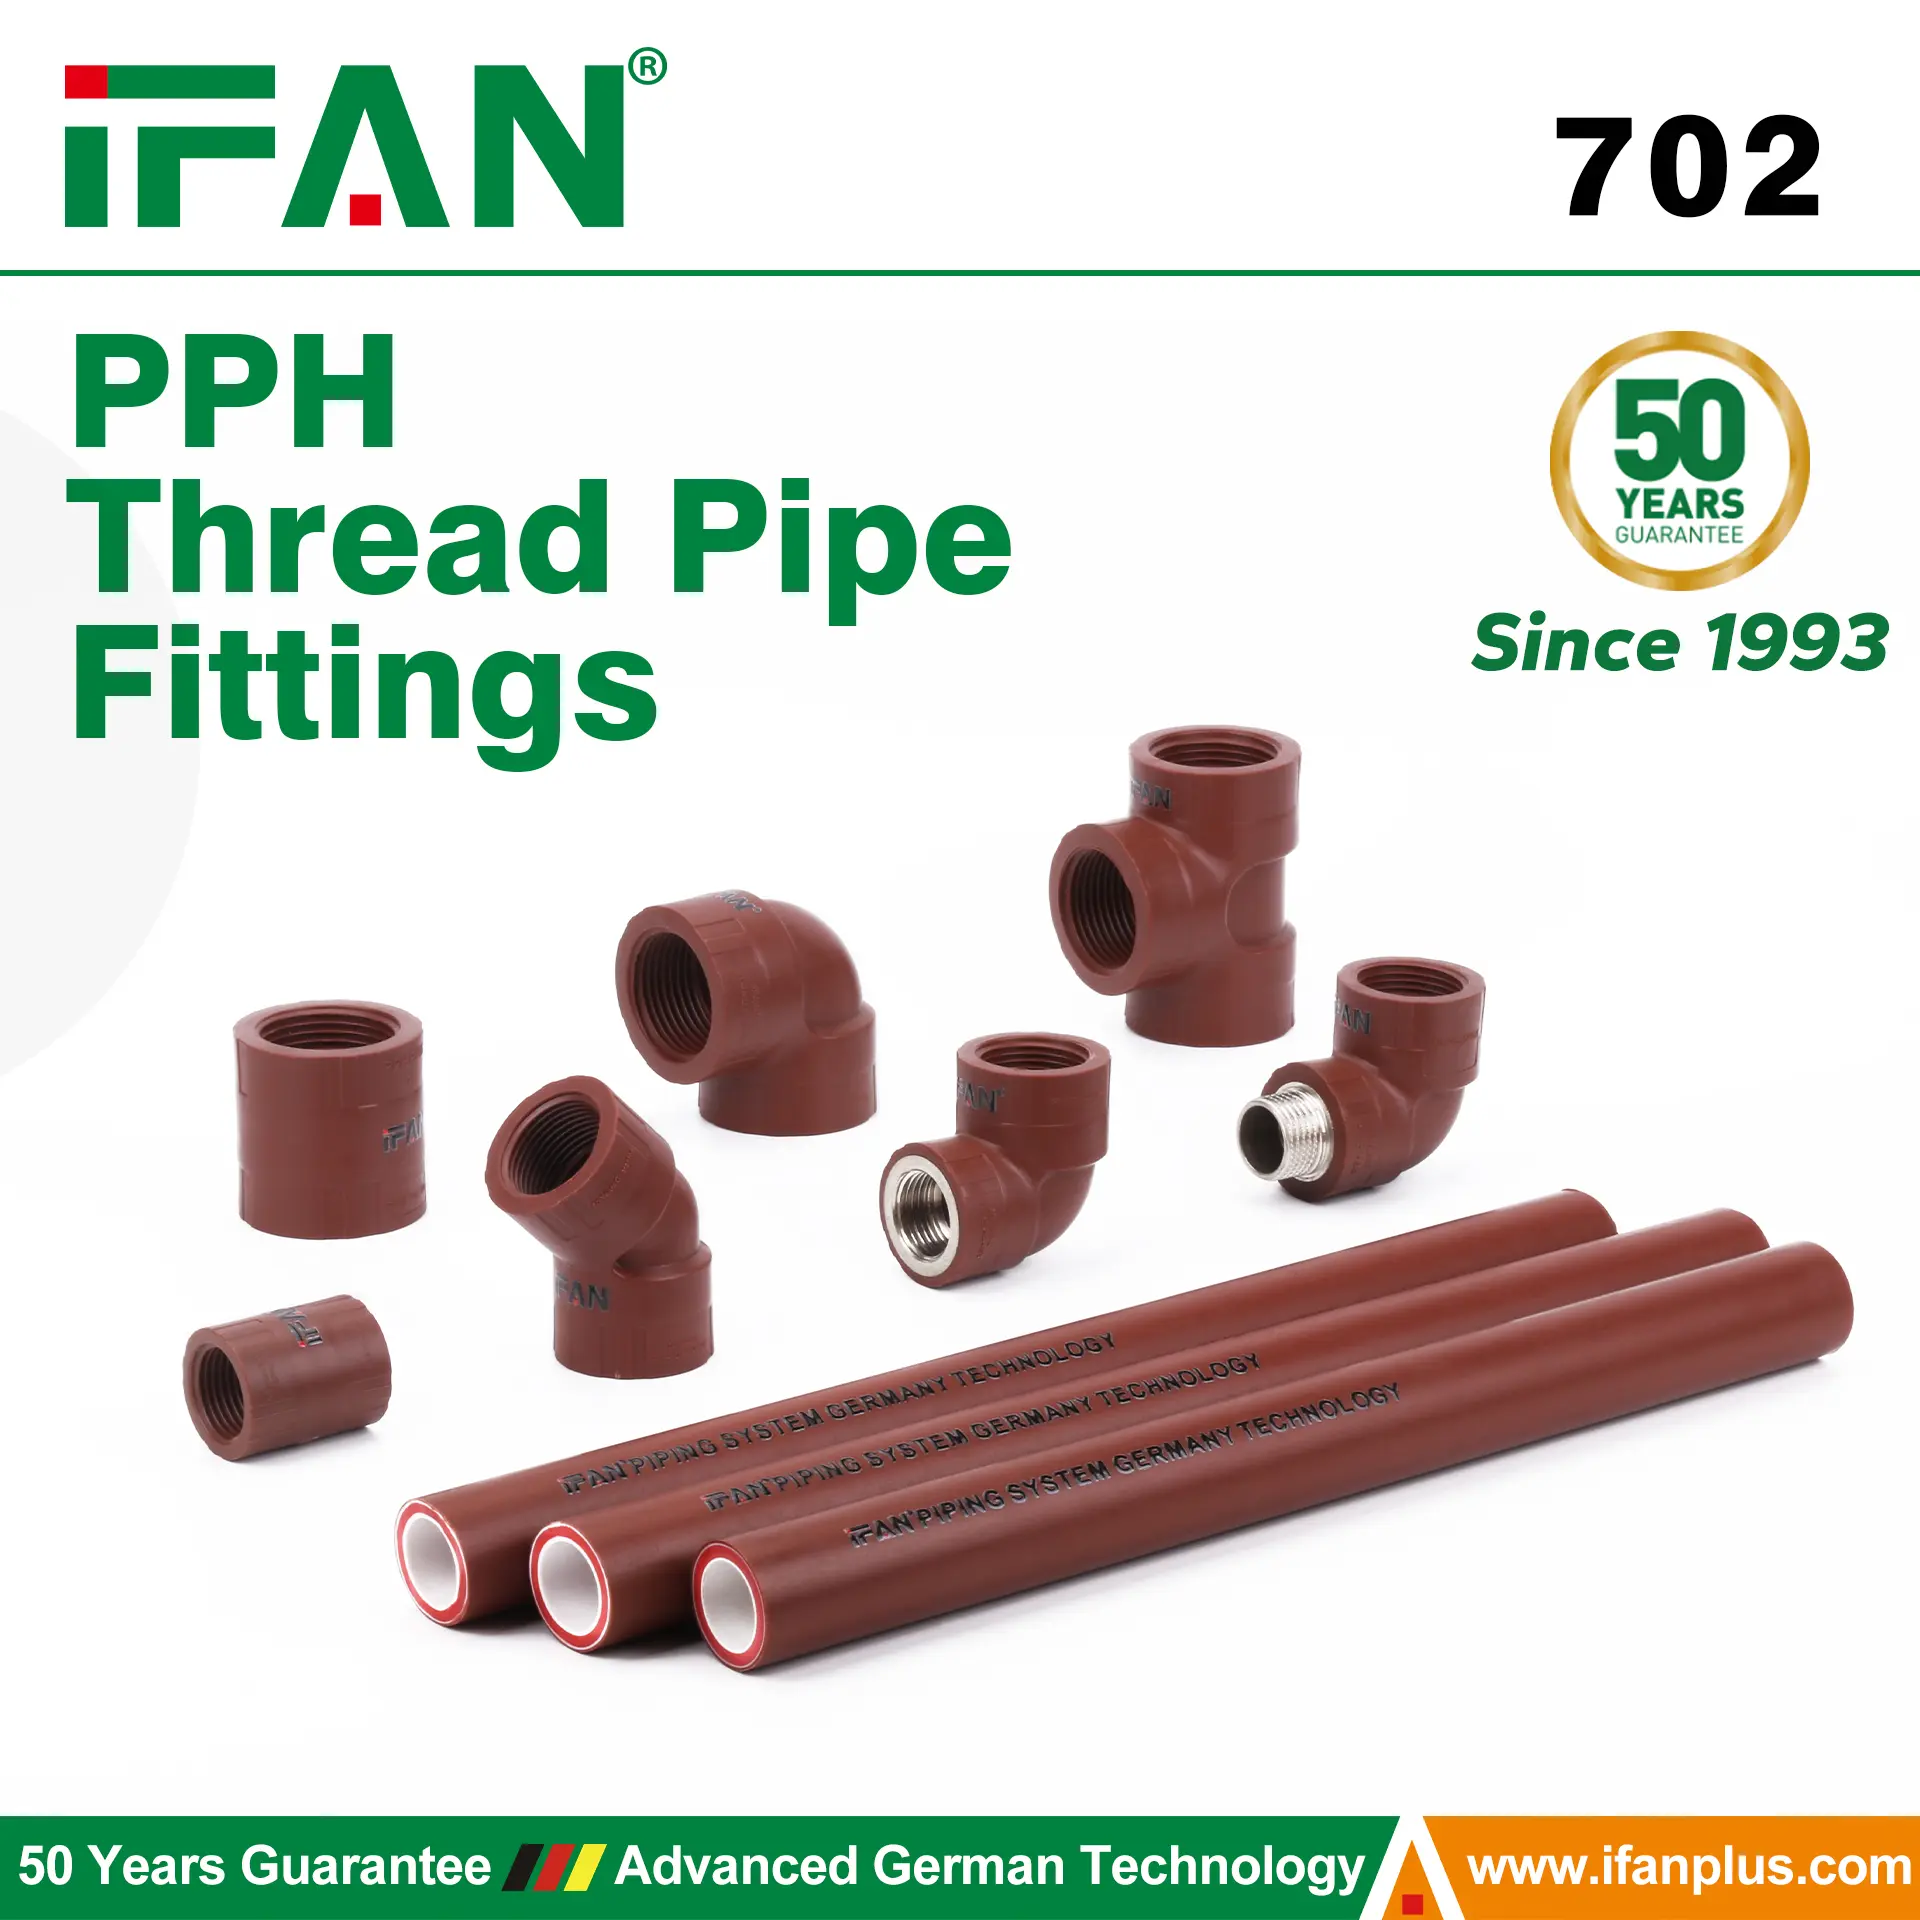 PPH Thread Pipe Fittings 702